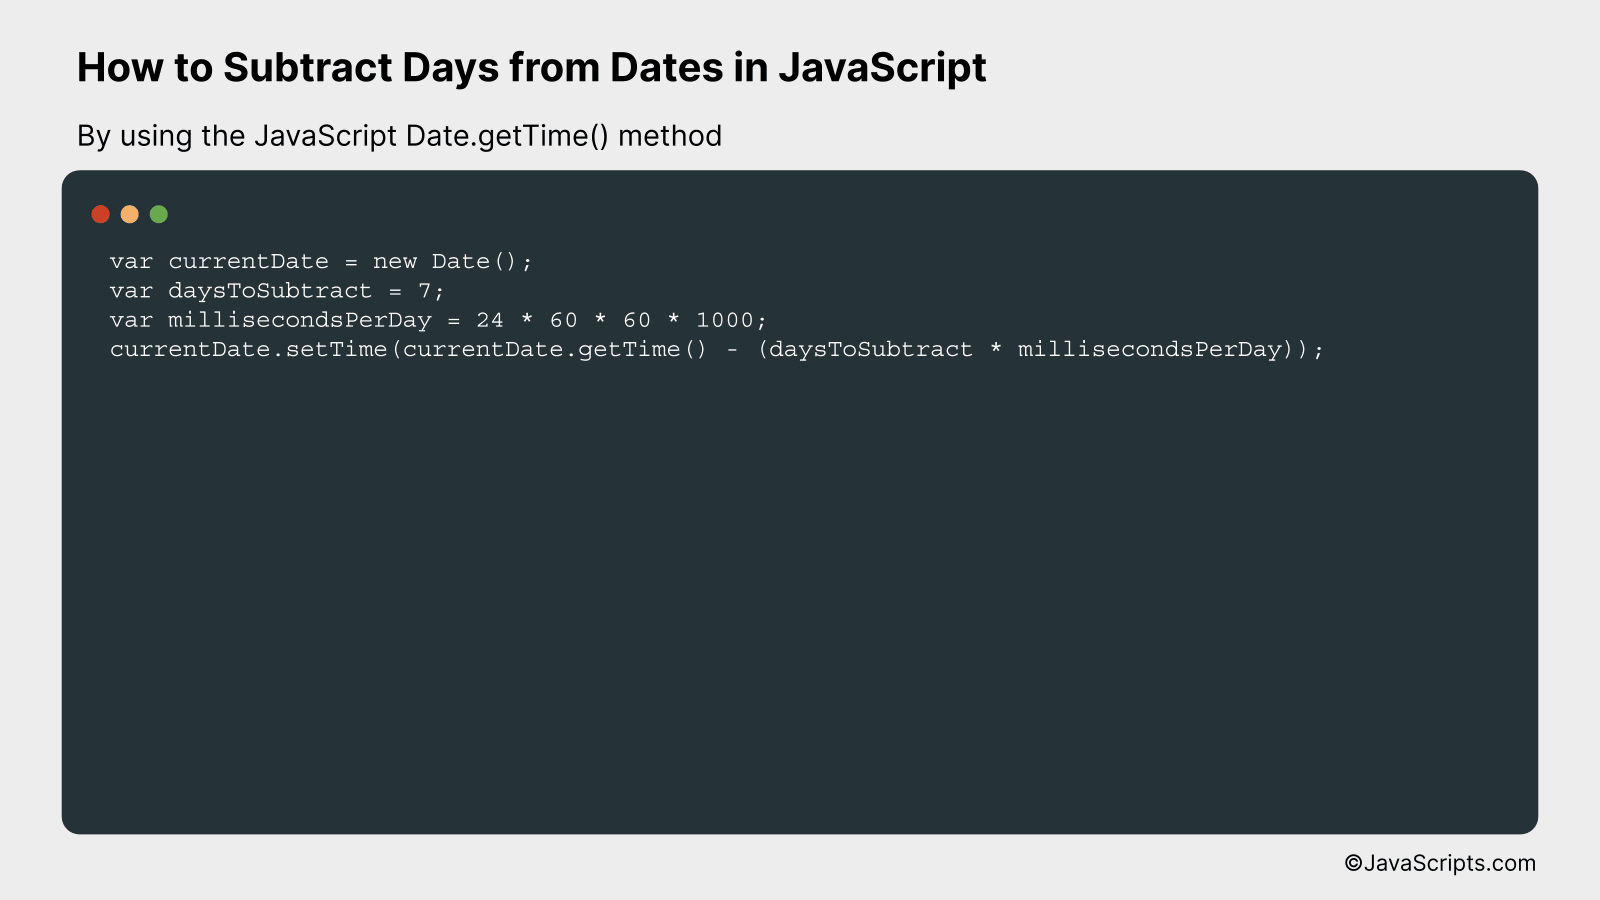 By using the JavaScript Date.getTime() method